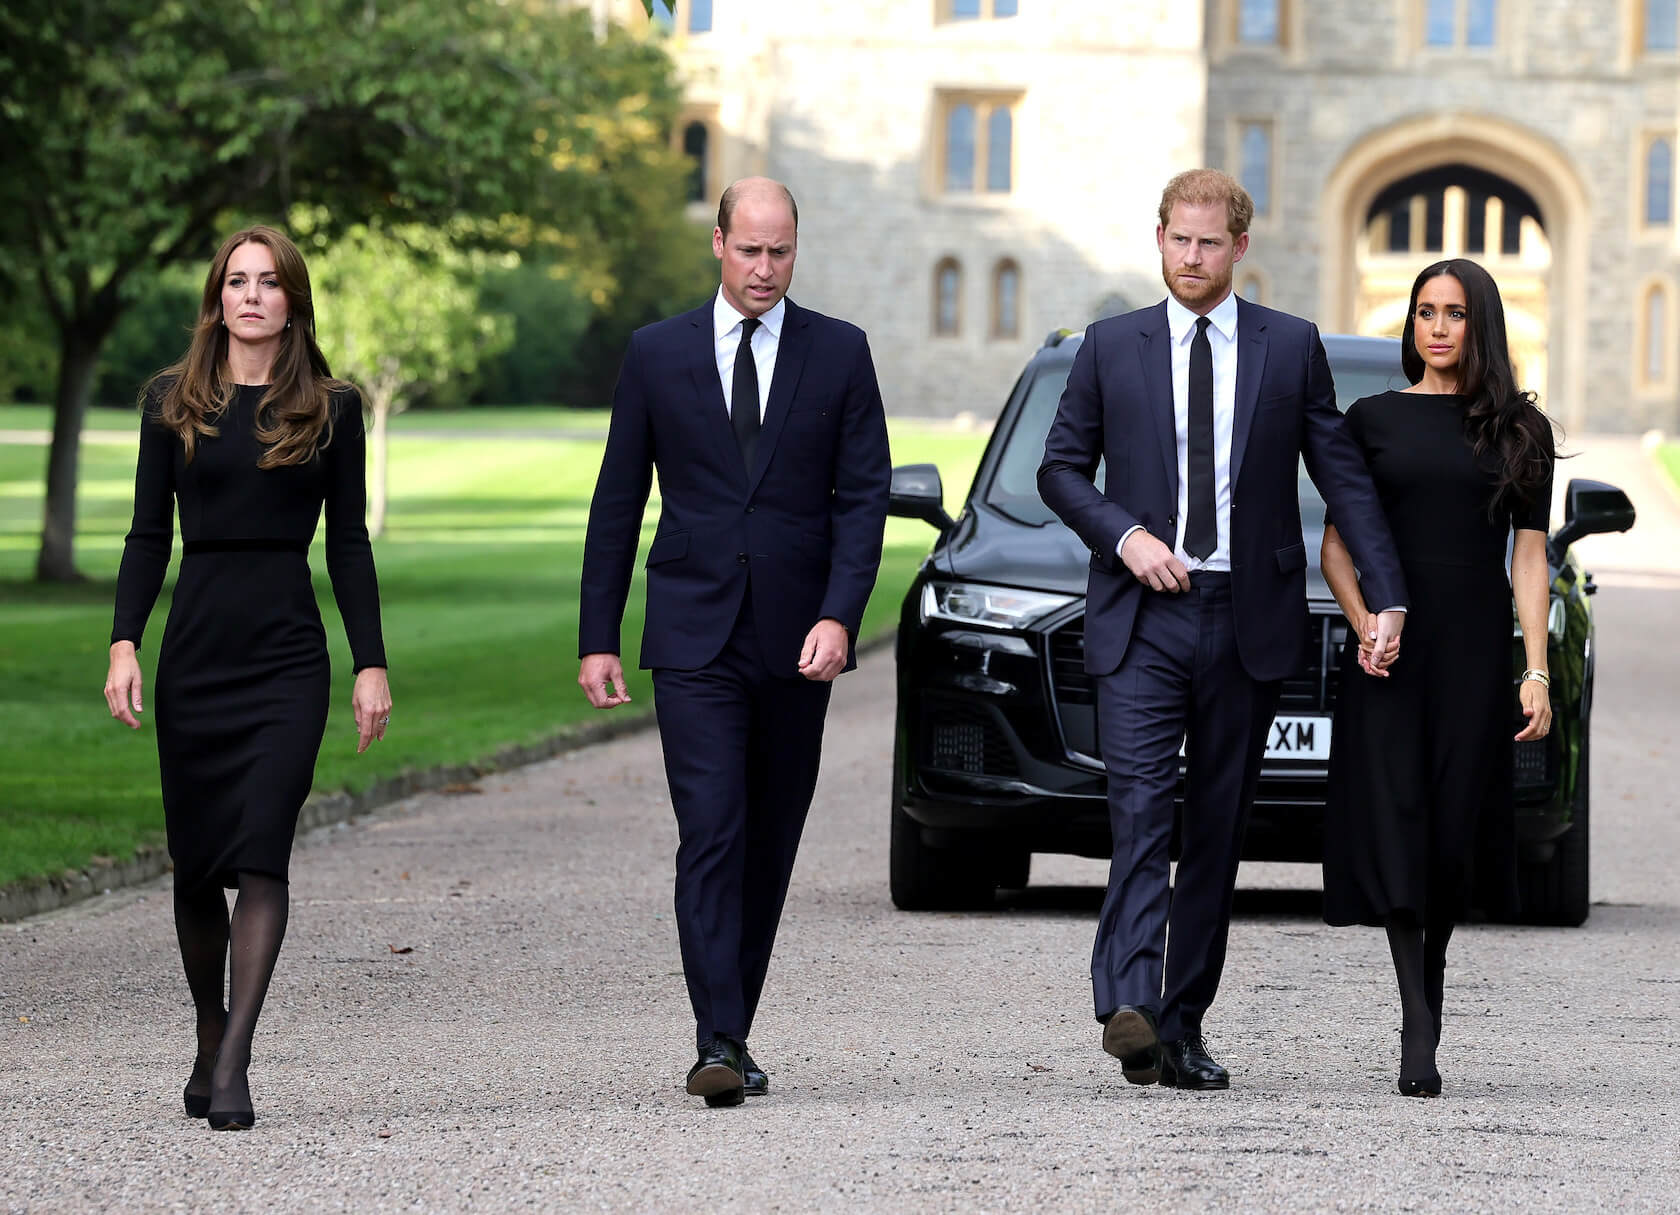 Kate Middleton, Prince William, Prince Harry, and Meghan Markle wearing black and walking